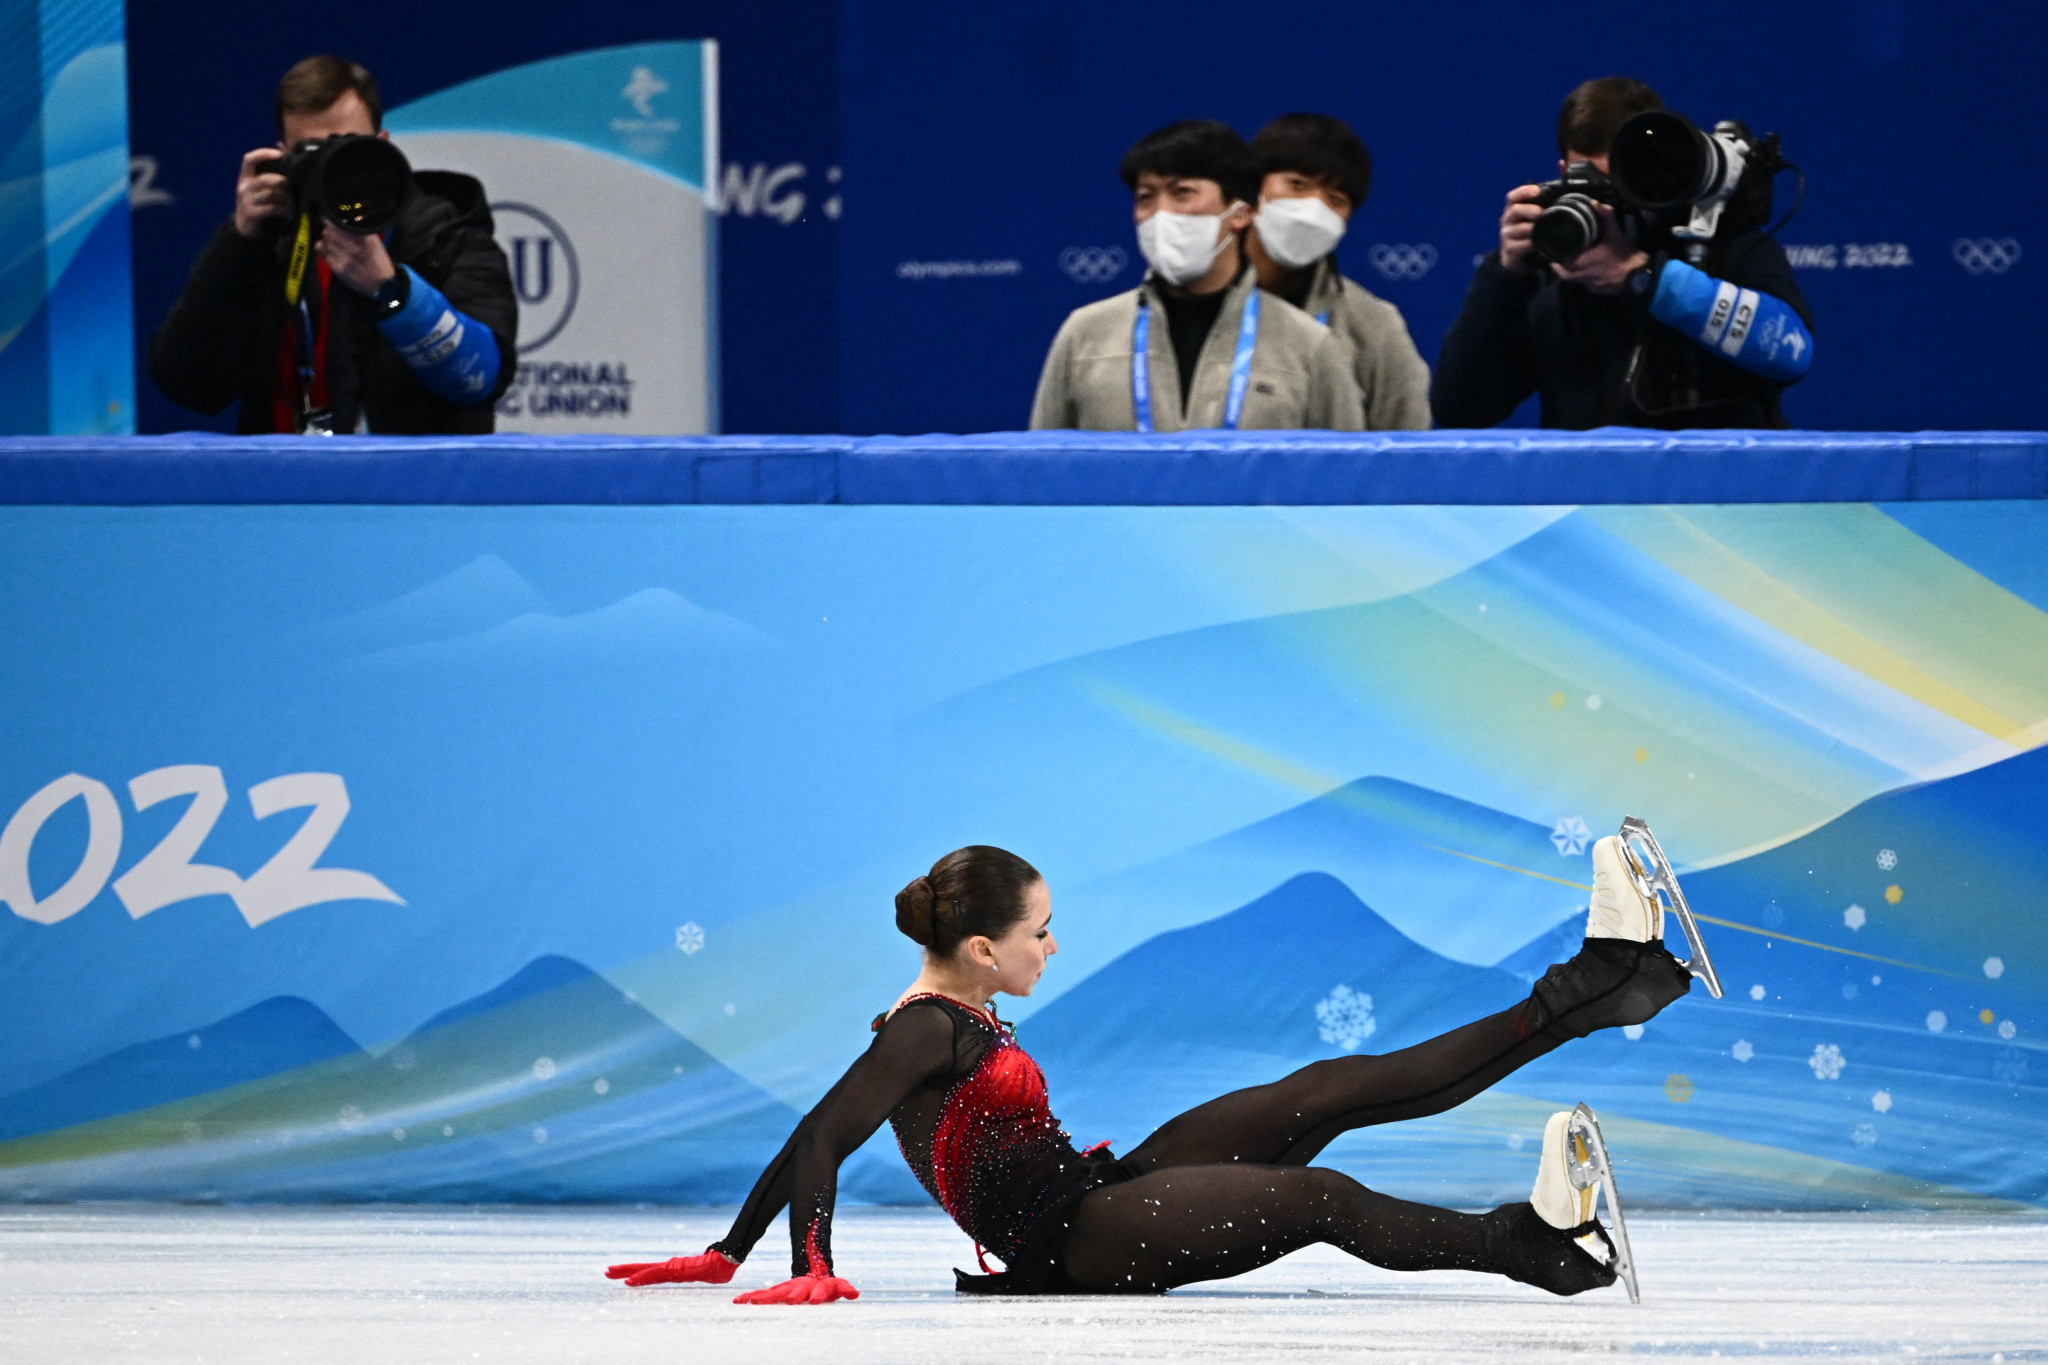 A series of errors saw Kamila Valieva miss out on a podium place after a week of controversy ©Getty Images